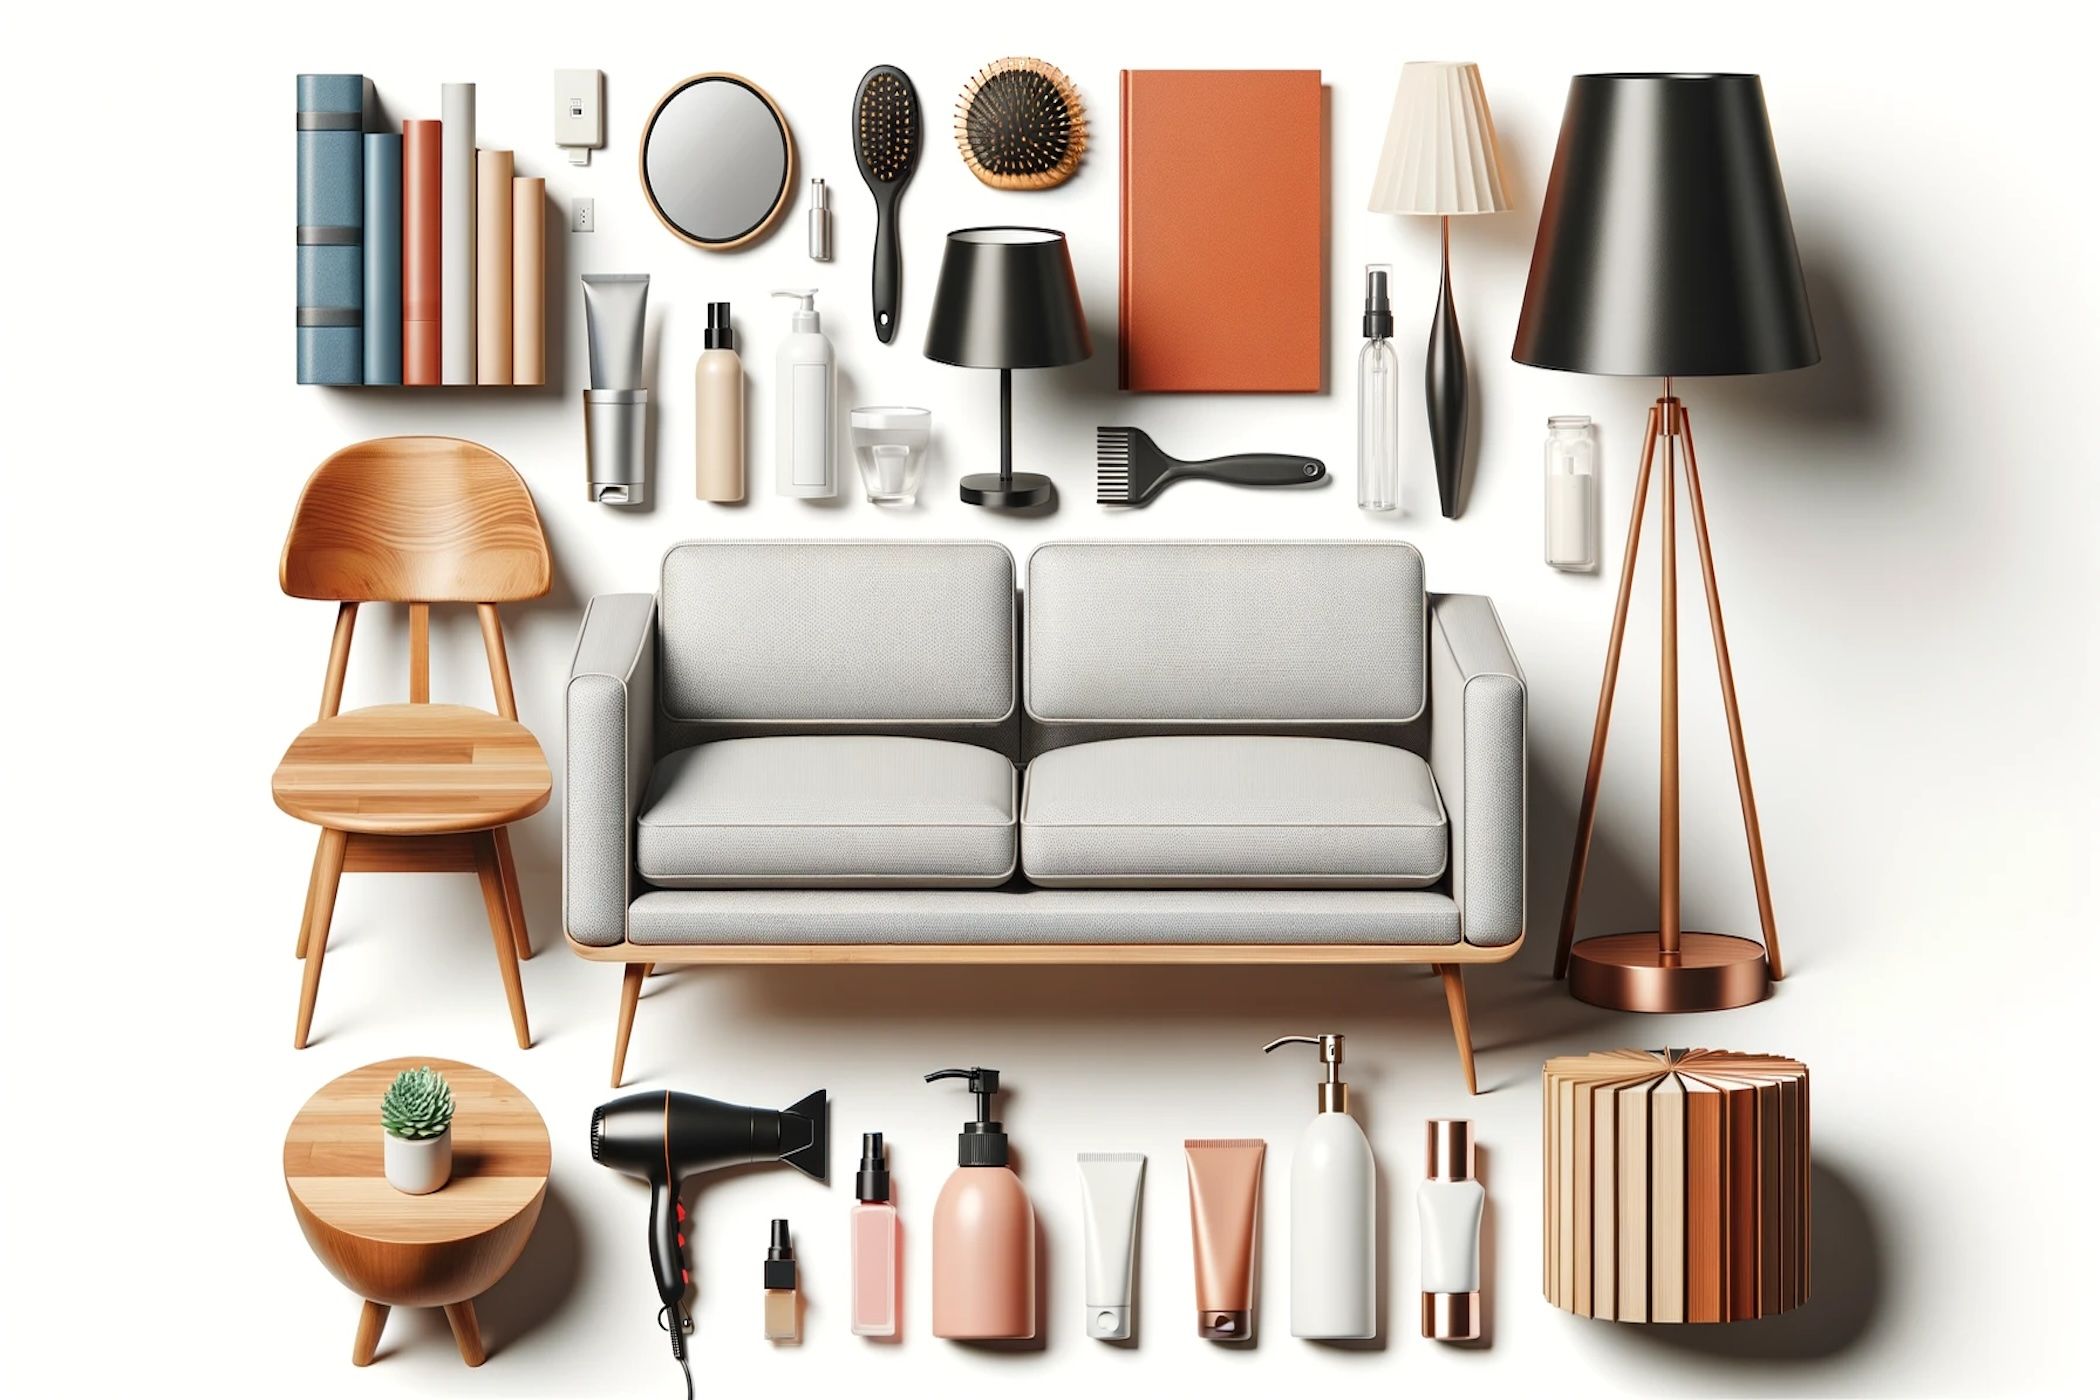 Photo of various typical online products such as a modern couch, wooden coffee table, floor lamp, hairdryer, and skincare products neatly arranged on 